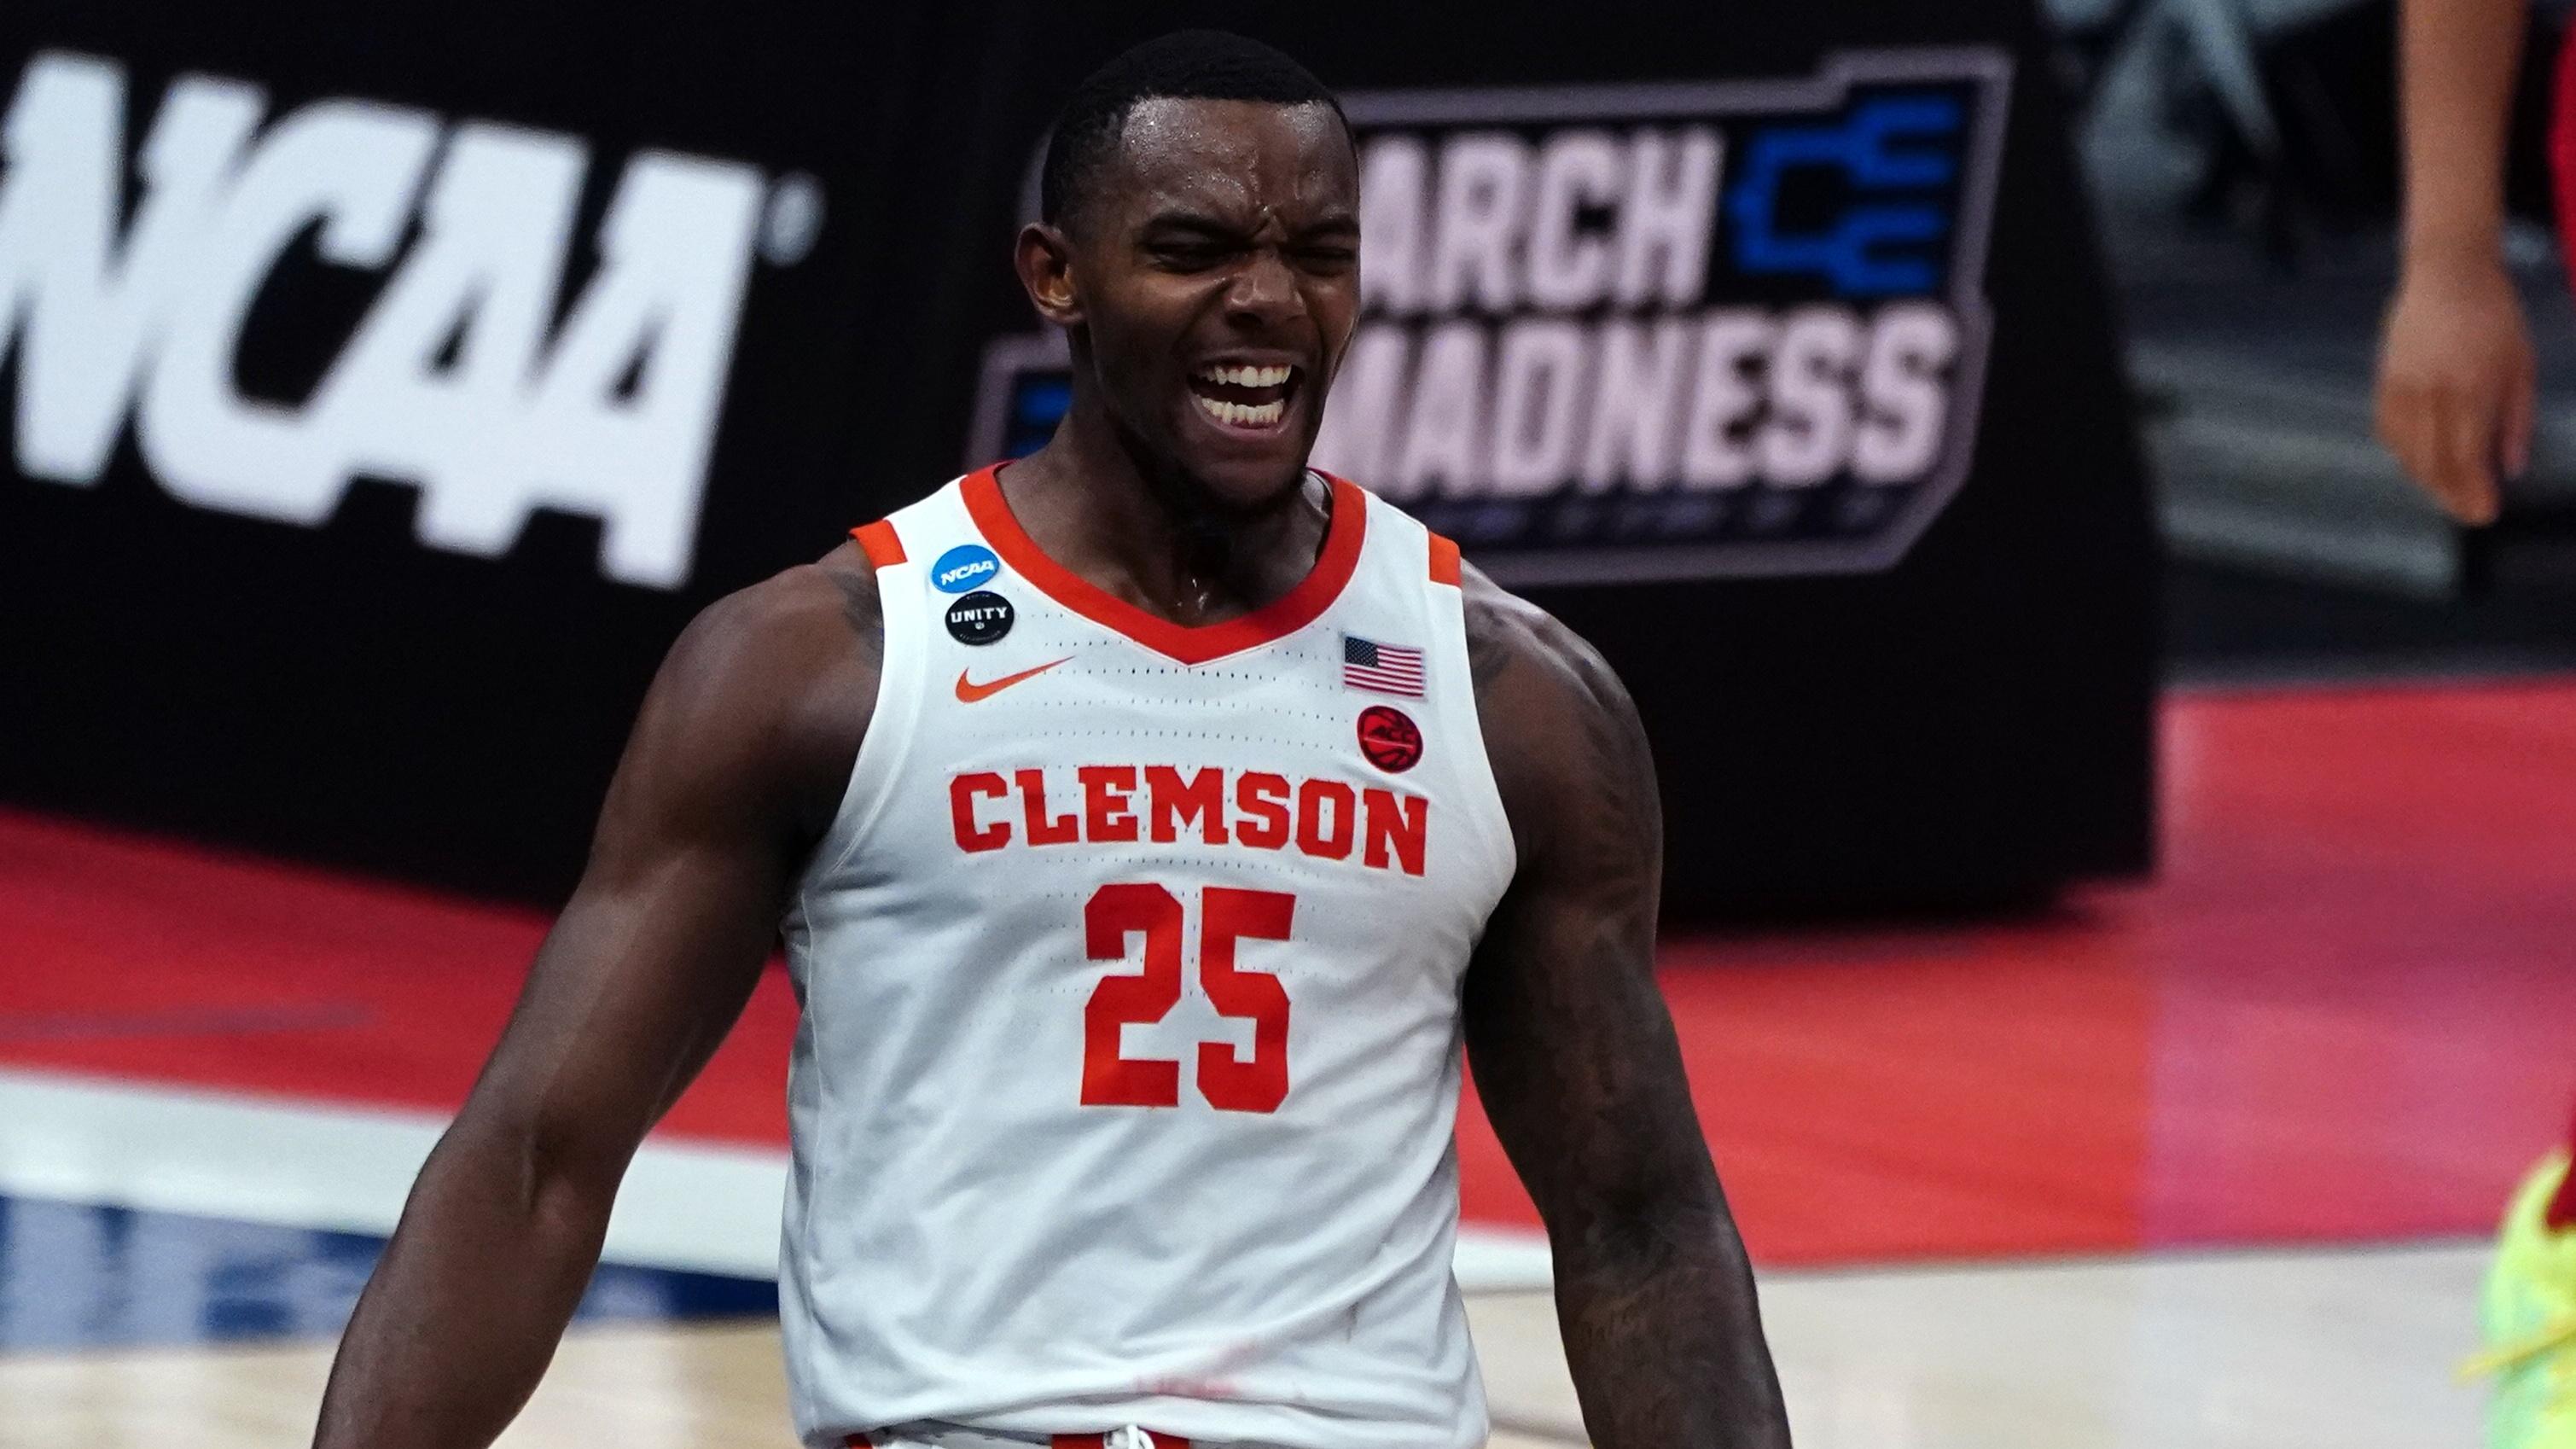 Mar 19, 2021; Indianapolis, Indiana, USA; Clemson Tigers forward Aamir Simms (25) reacts during the second half against the Rutgers Scarlet Knights in the first round of the 2021 NCAA Tournament at Bankers Life Fieldhouse. / © Kirby Lee-USA TODAY Sports